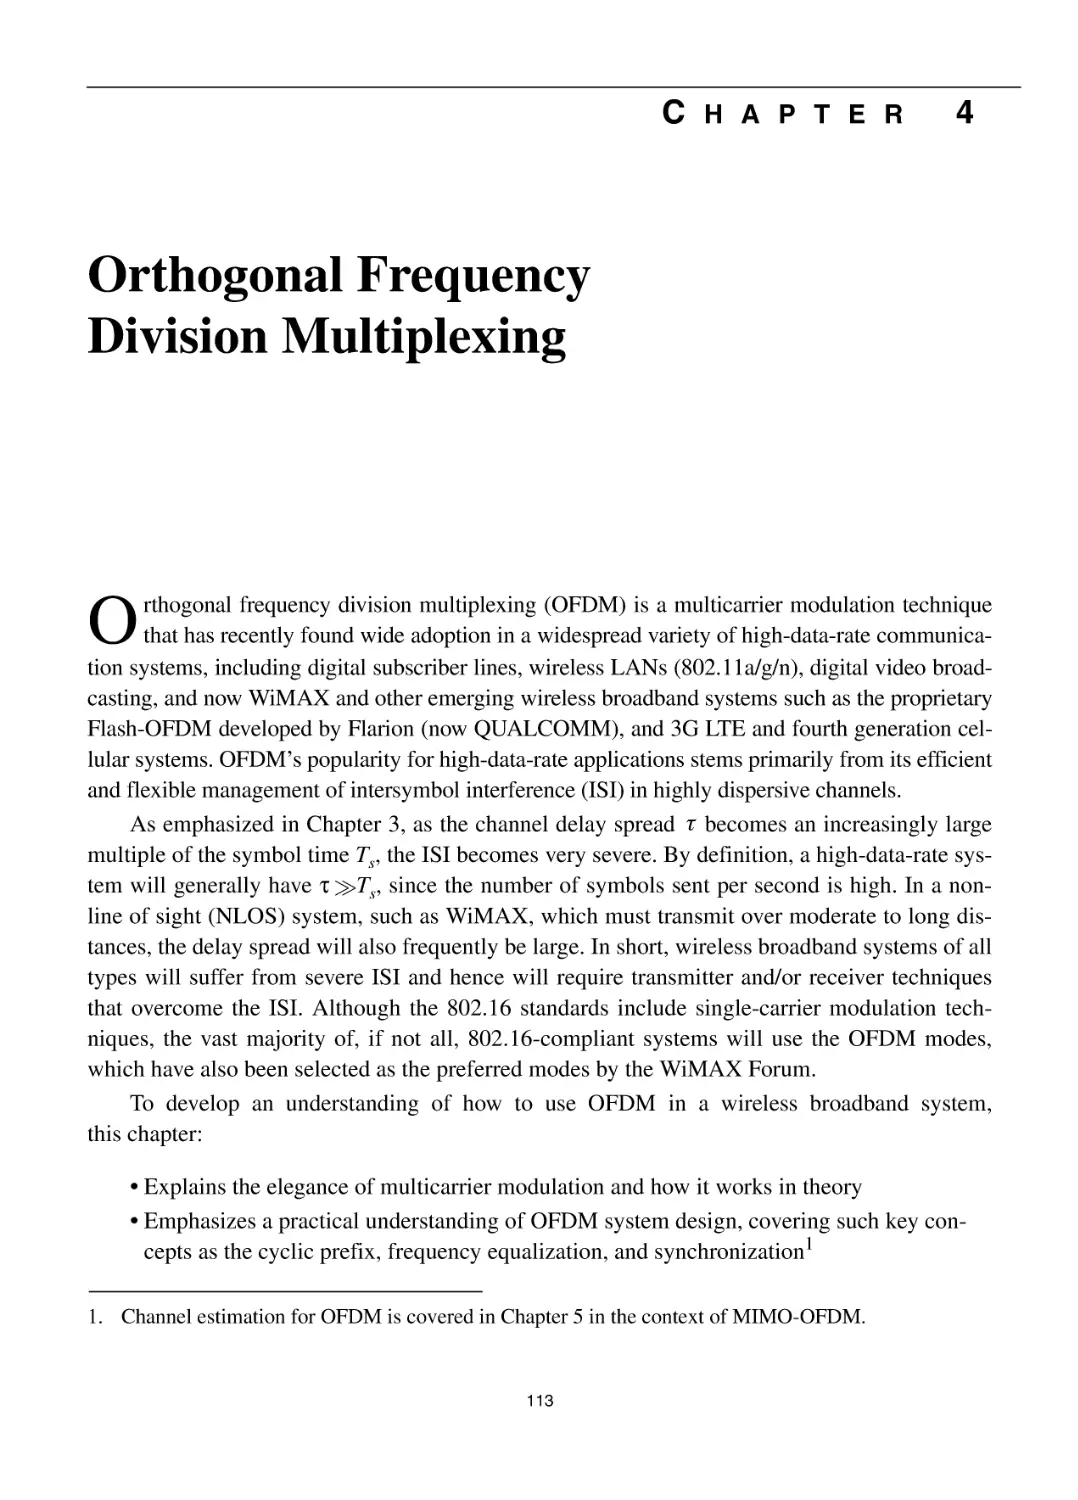 Chapter 4 Orthogonal Frequency Division Multiplexing